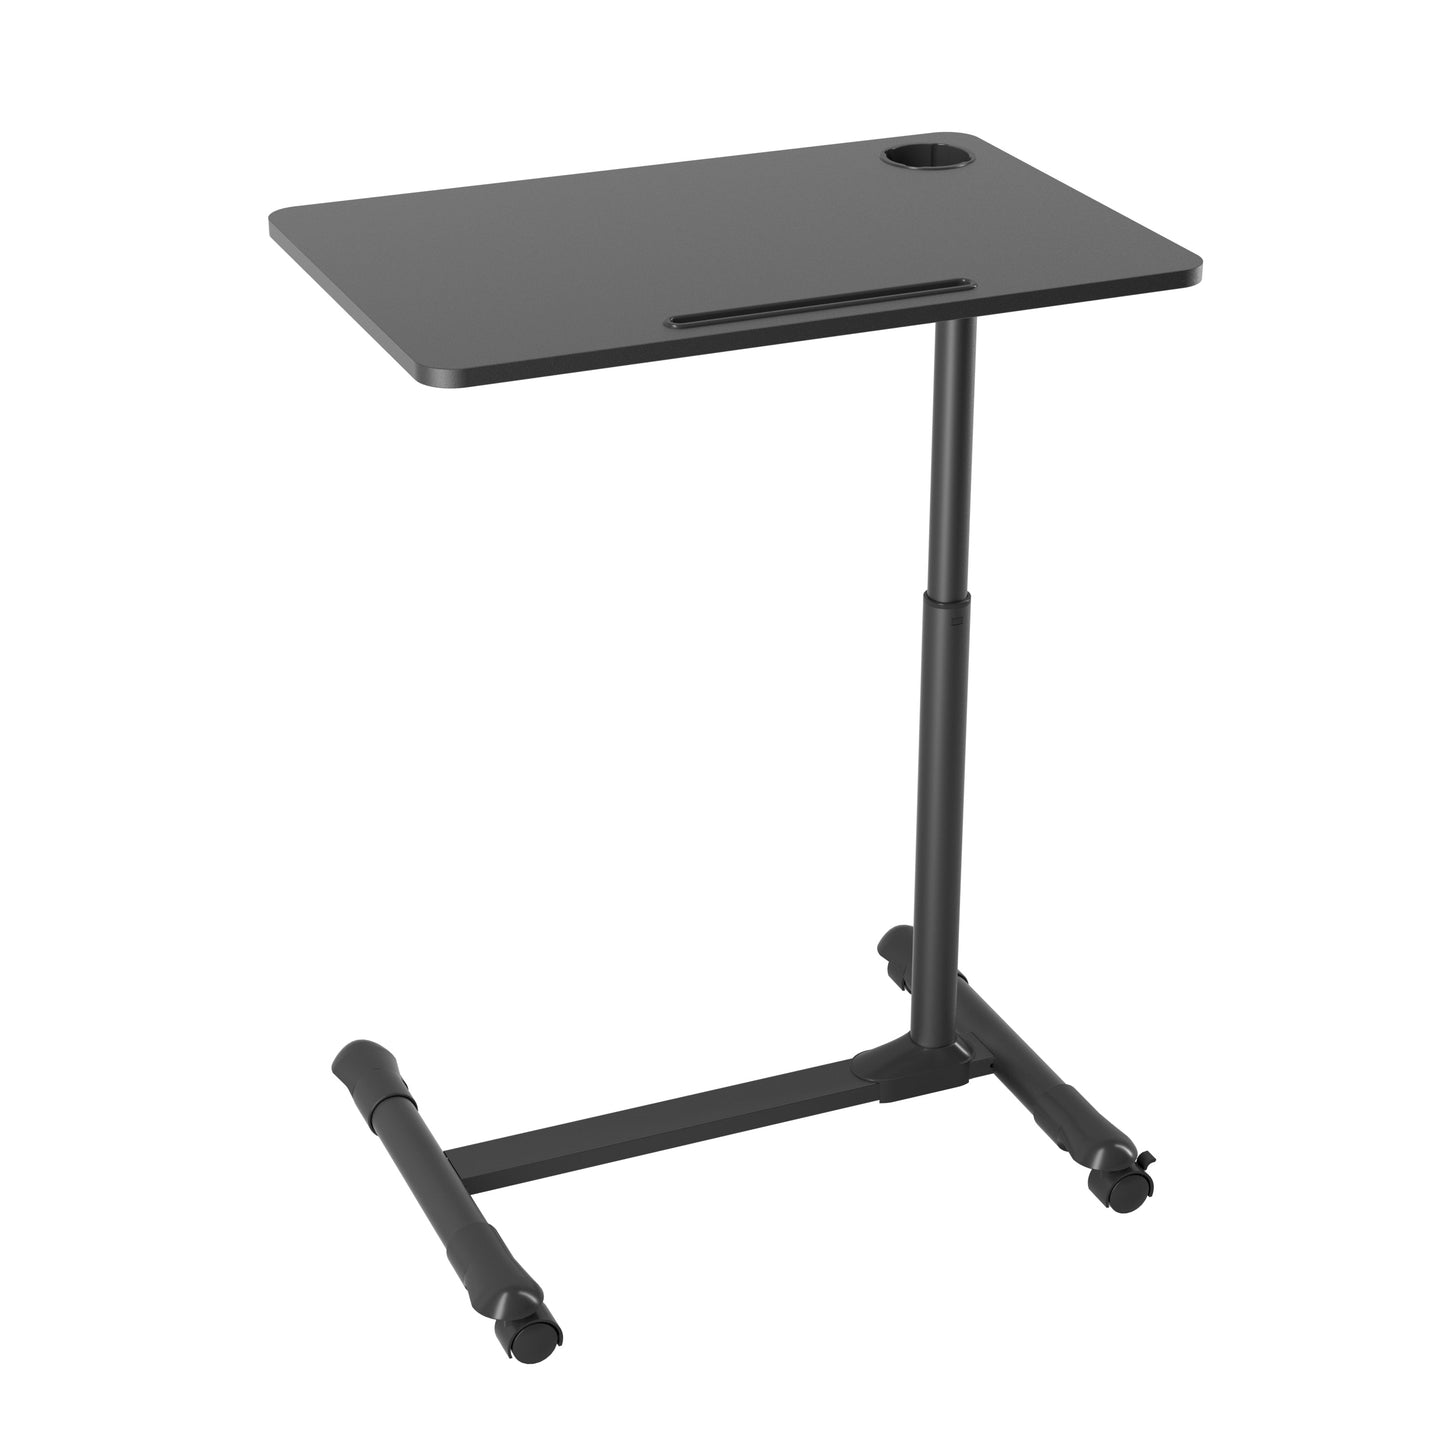 ProMounts Mobile Desk Workstation, Rolling Computer Desk with Built-in Cable Management, Laptop Stand on Wheels for School and Office, Mobile Laptop Cart Holds up to 11lbs (Black)